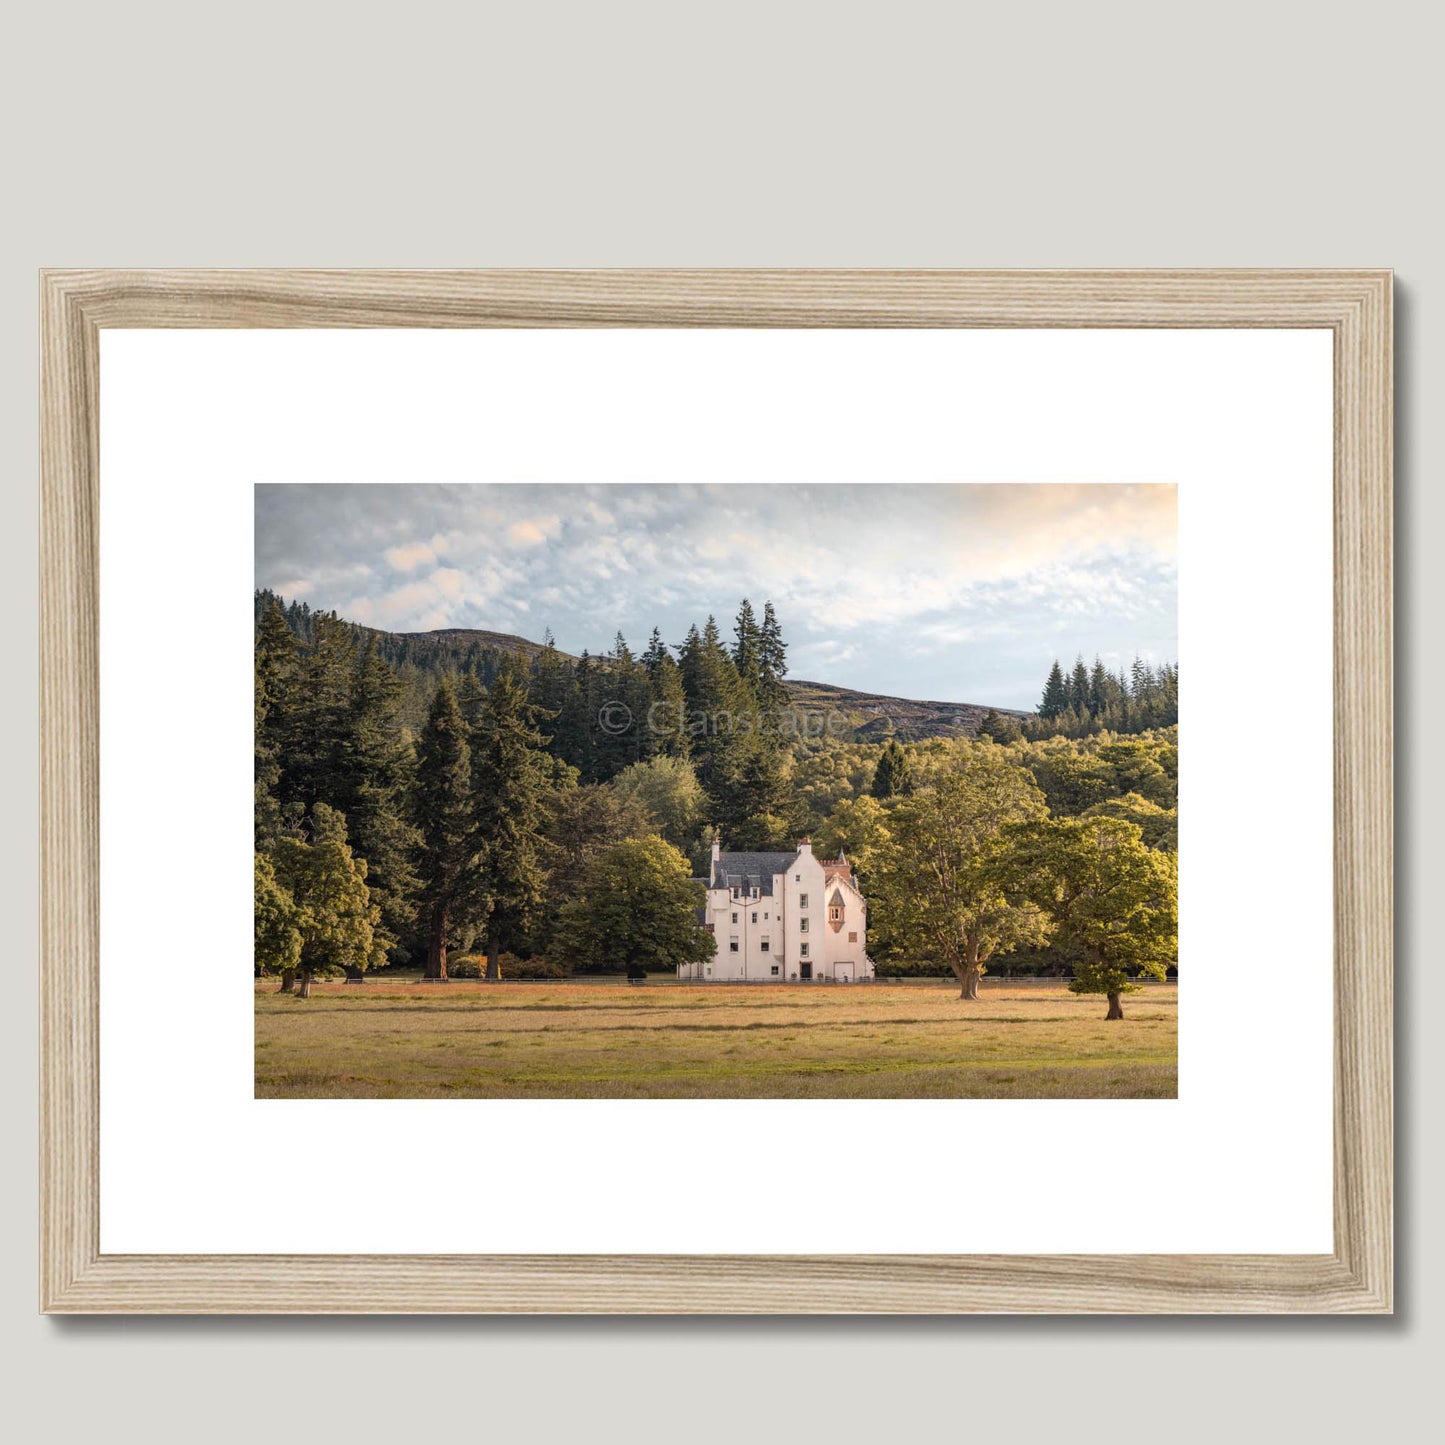 Clan Chisholm - Erchless Castle - Framed & Mounted Photo Print 16"x12" Natural